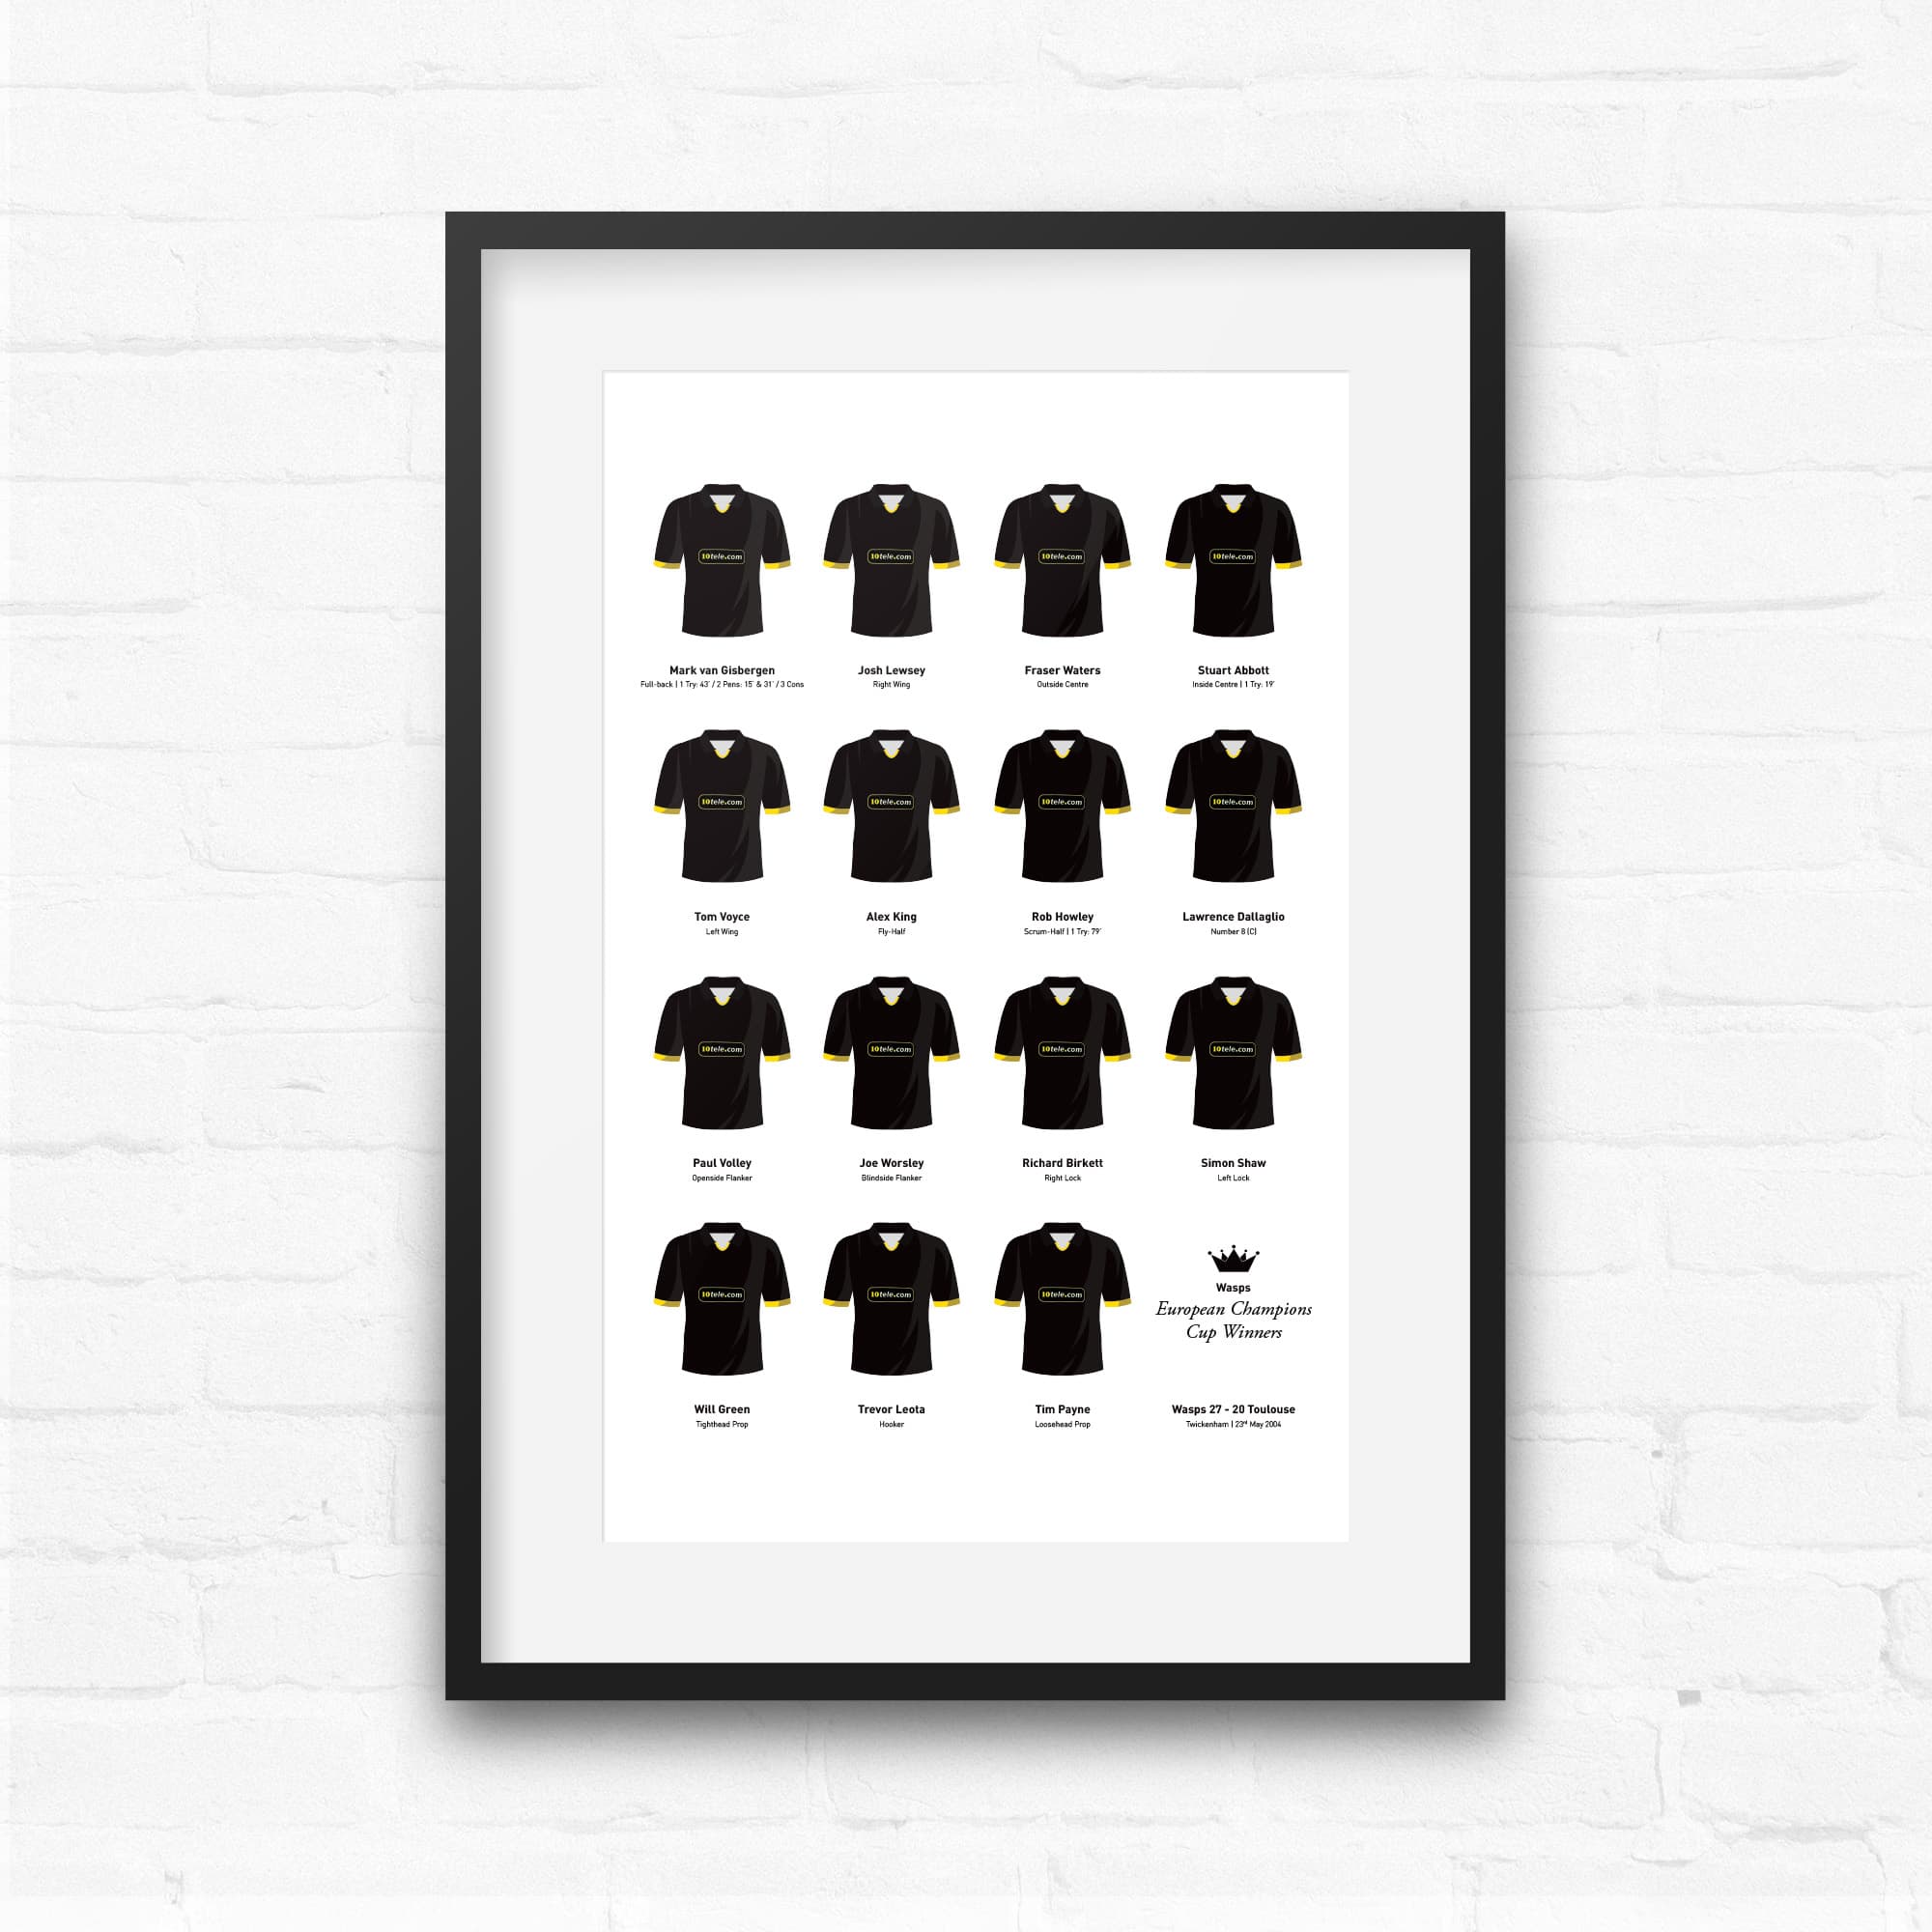 Wasps Rugby Union 2004 European Champions Cup Winners Team Print